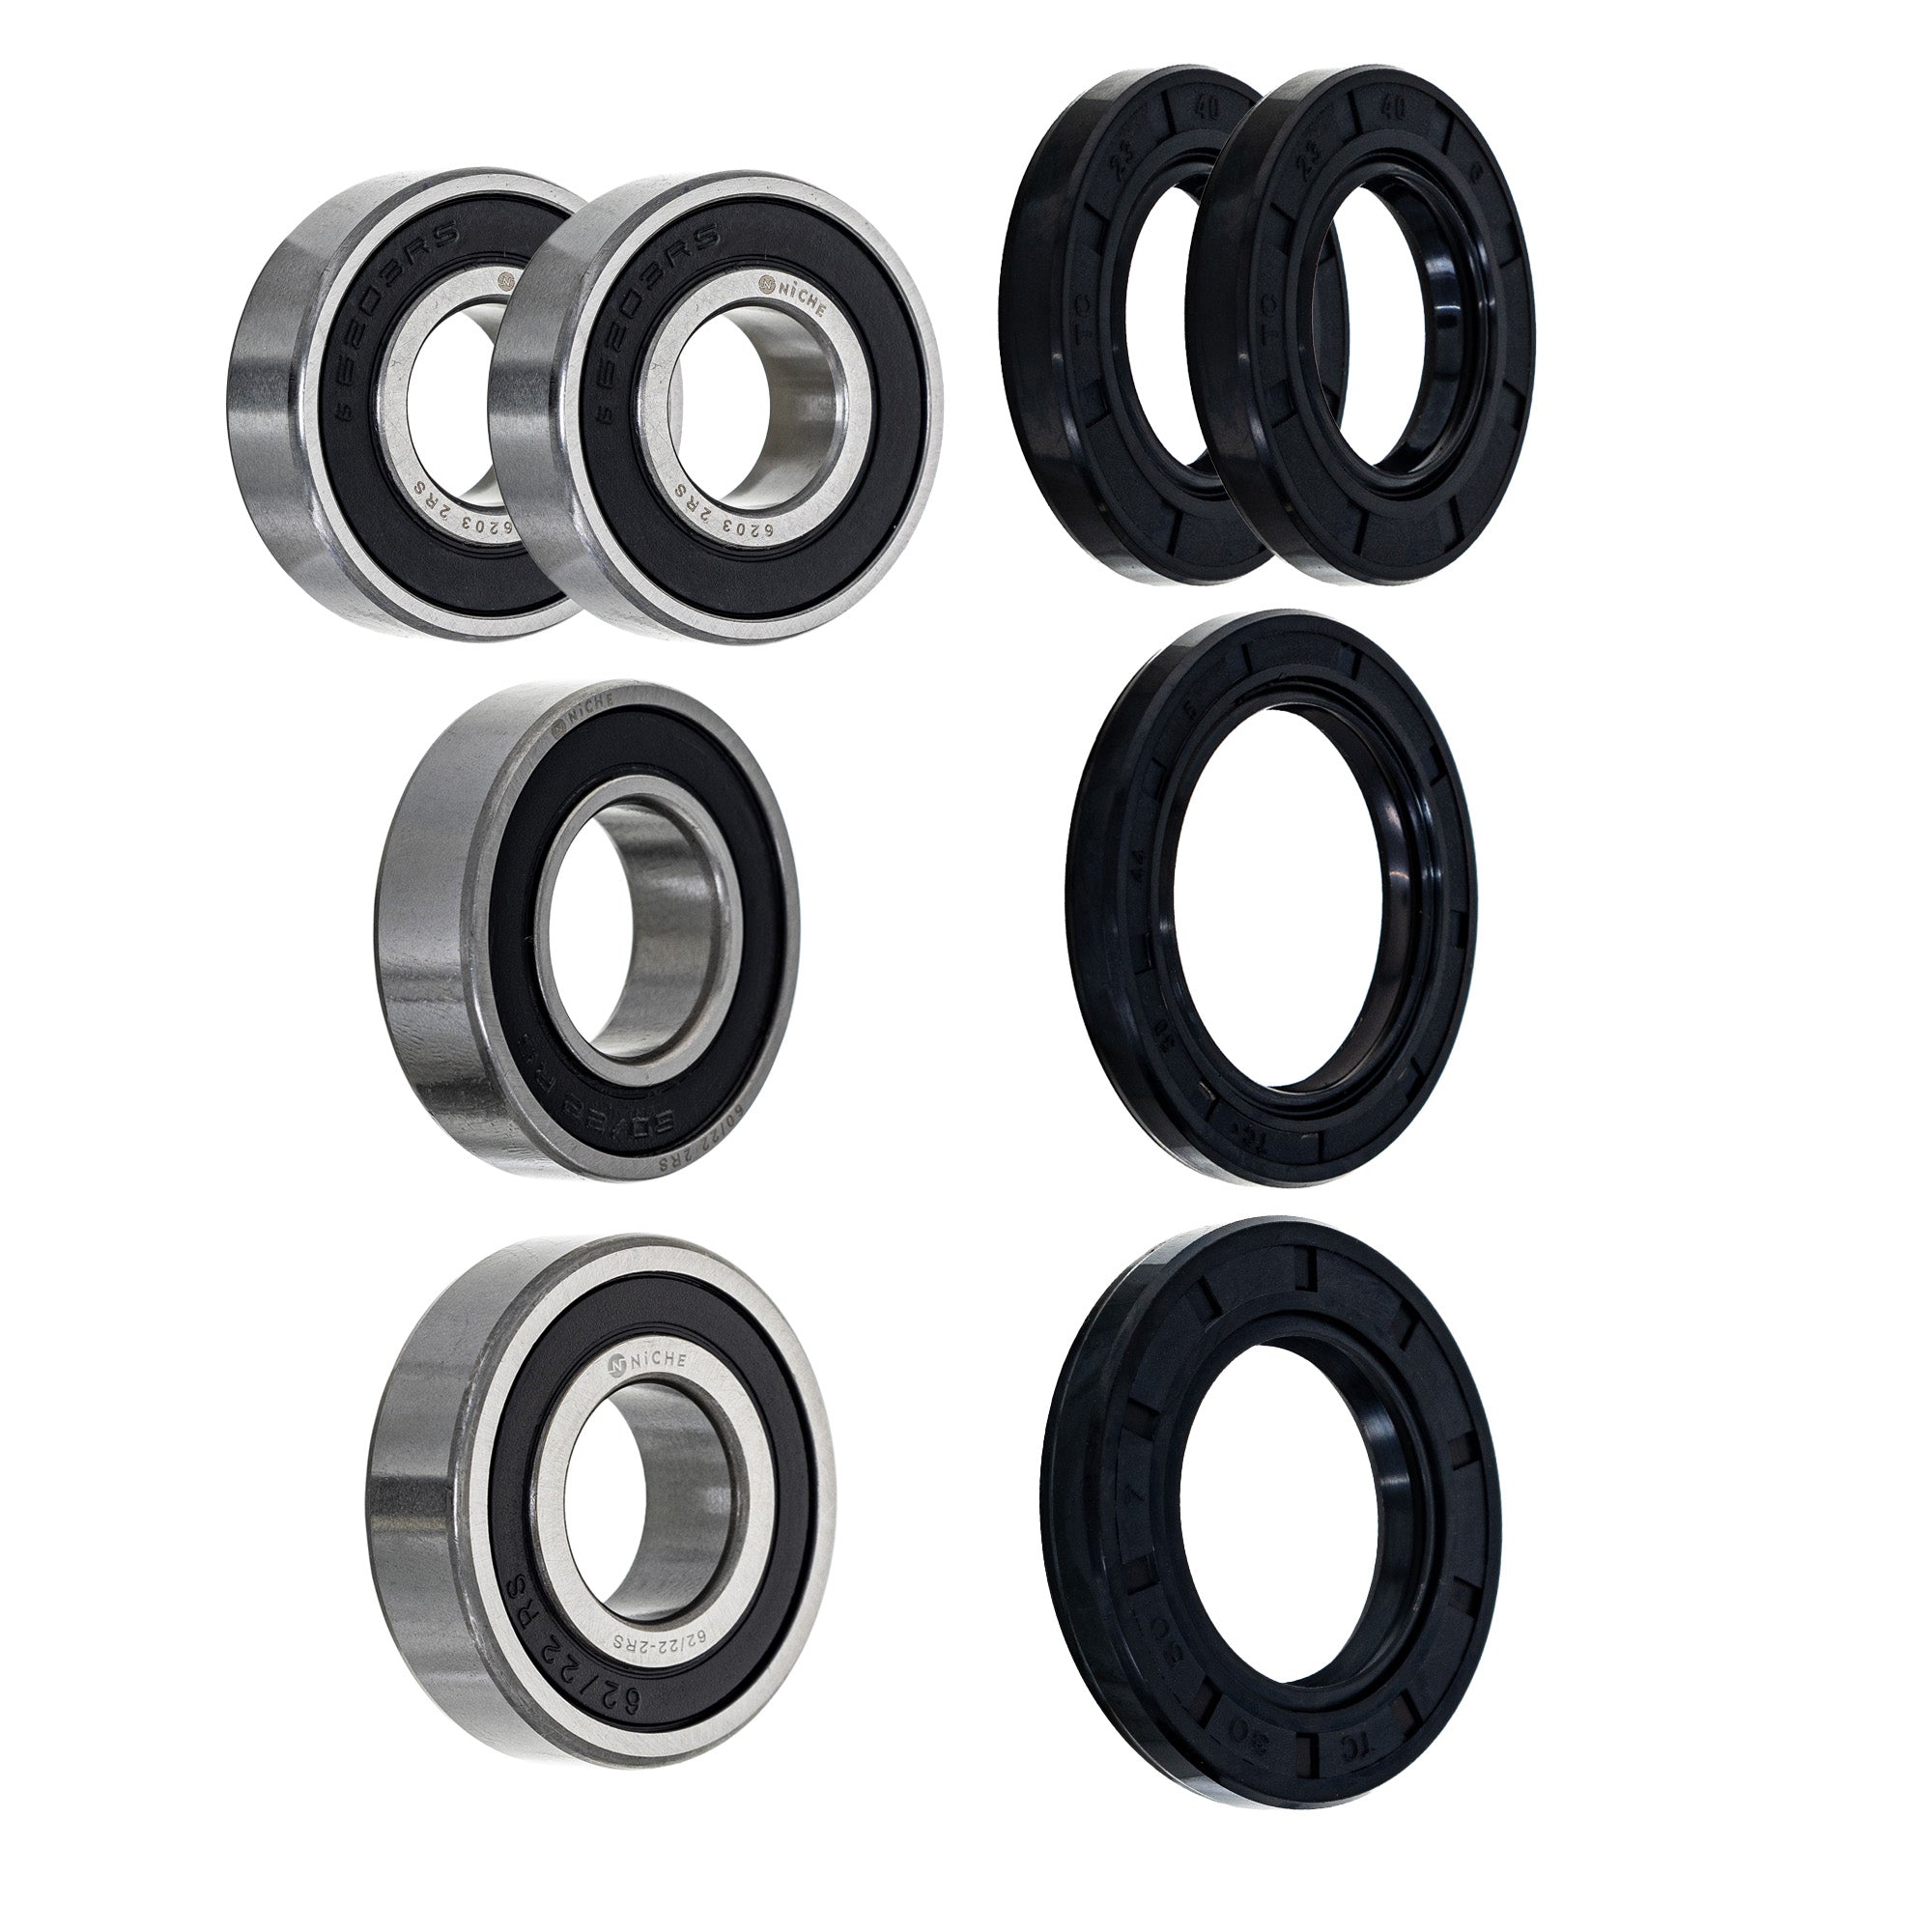 Wheel Bearing Seal Kit for zOTHER Ref No WR250X WR250R NICHE MK1008718